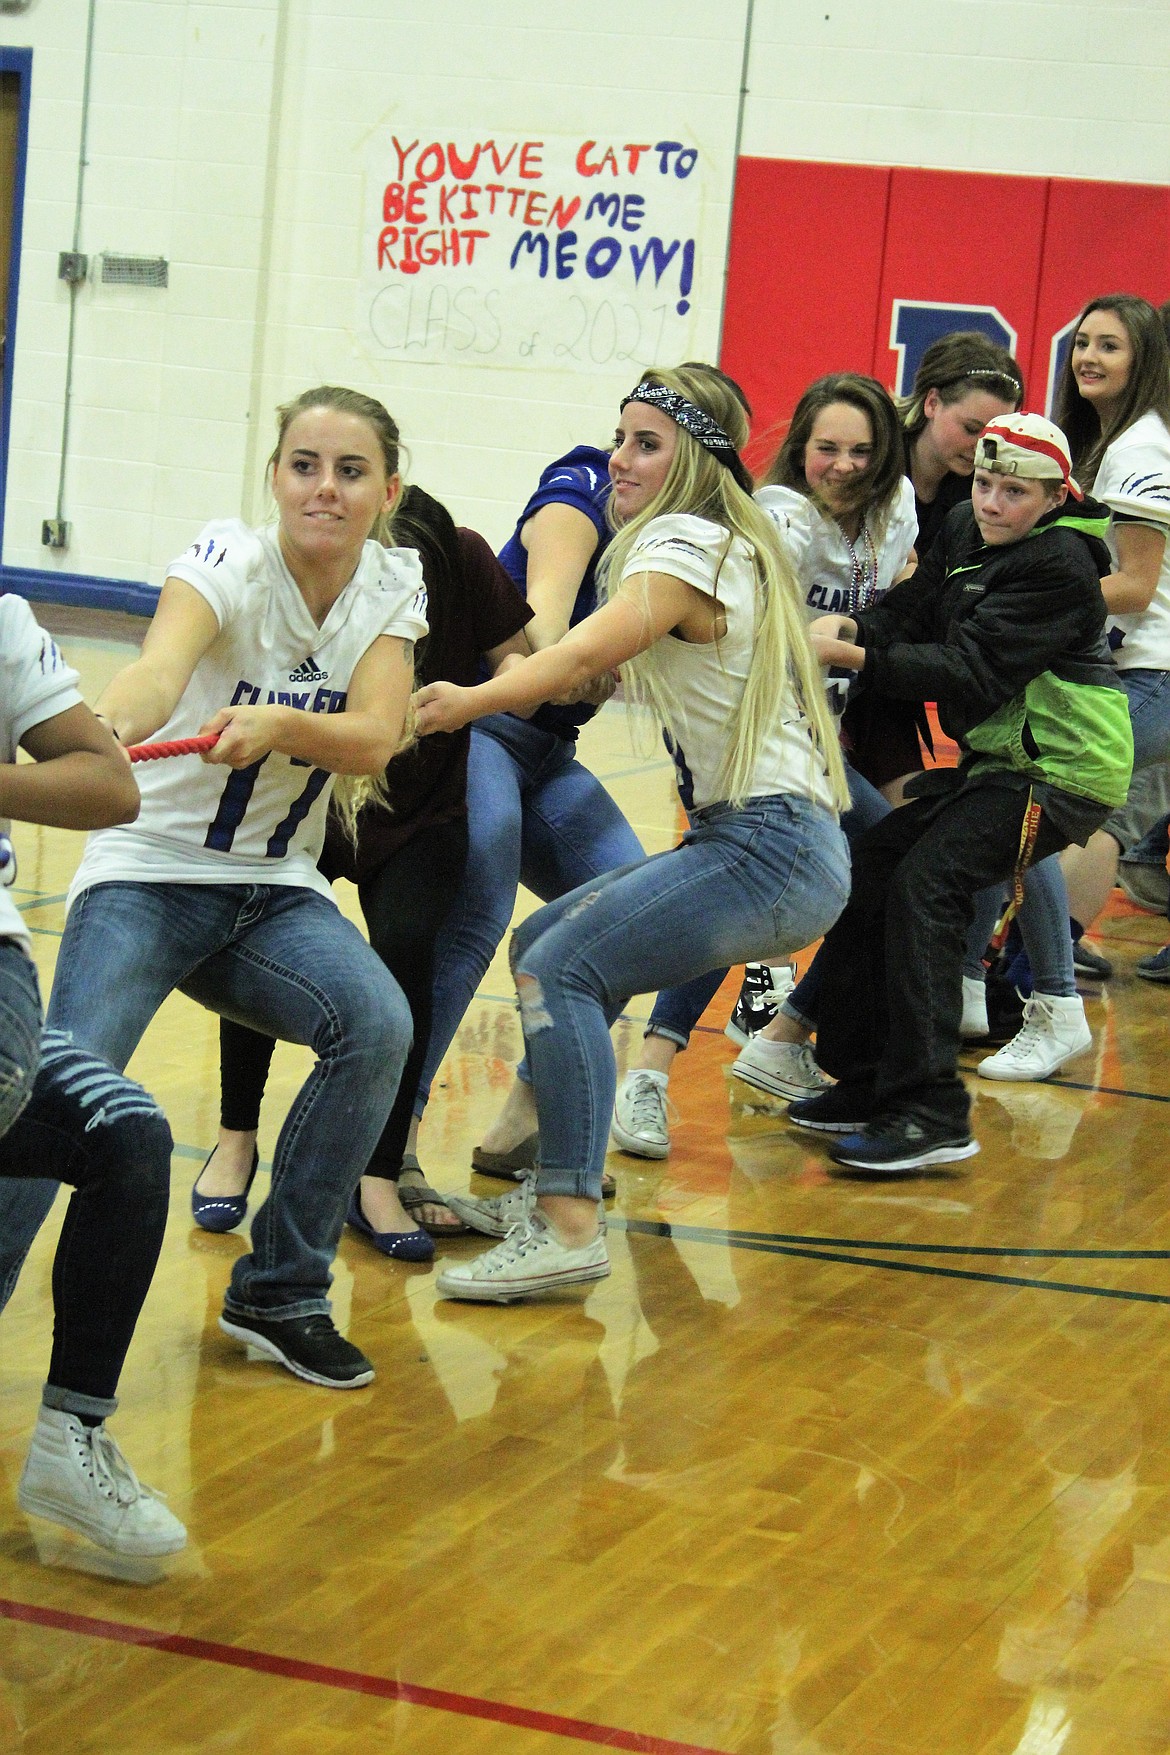 Students had a fun, old-fashioned tug-of-war during Friday afternoon games. (Photo by Frankie Kelly)